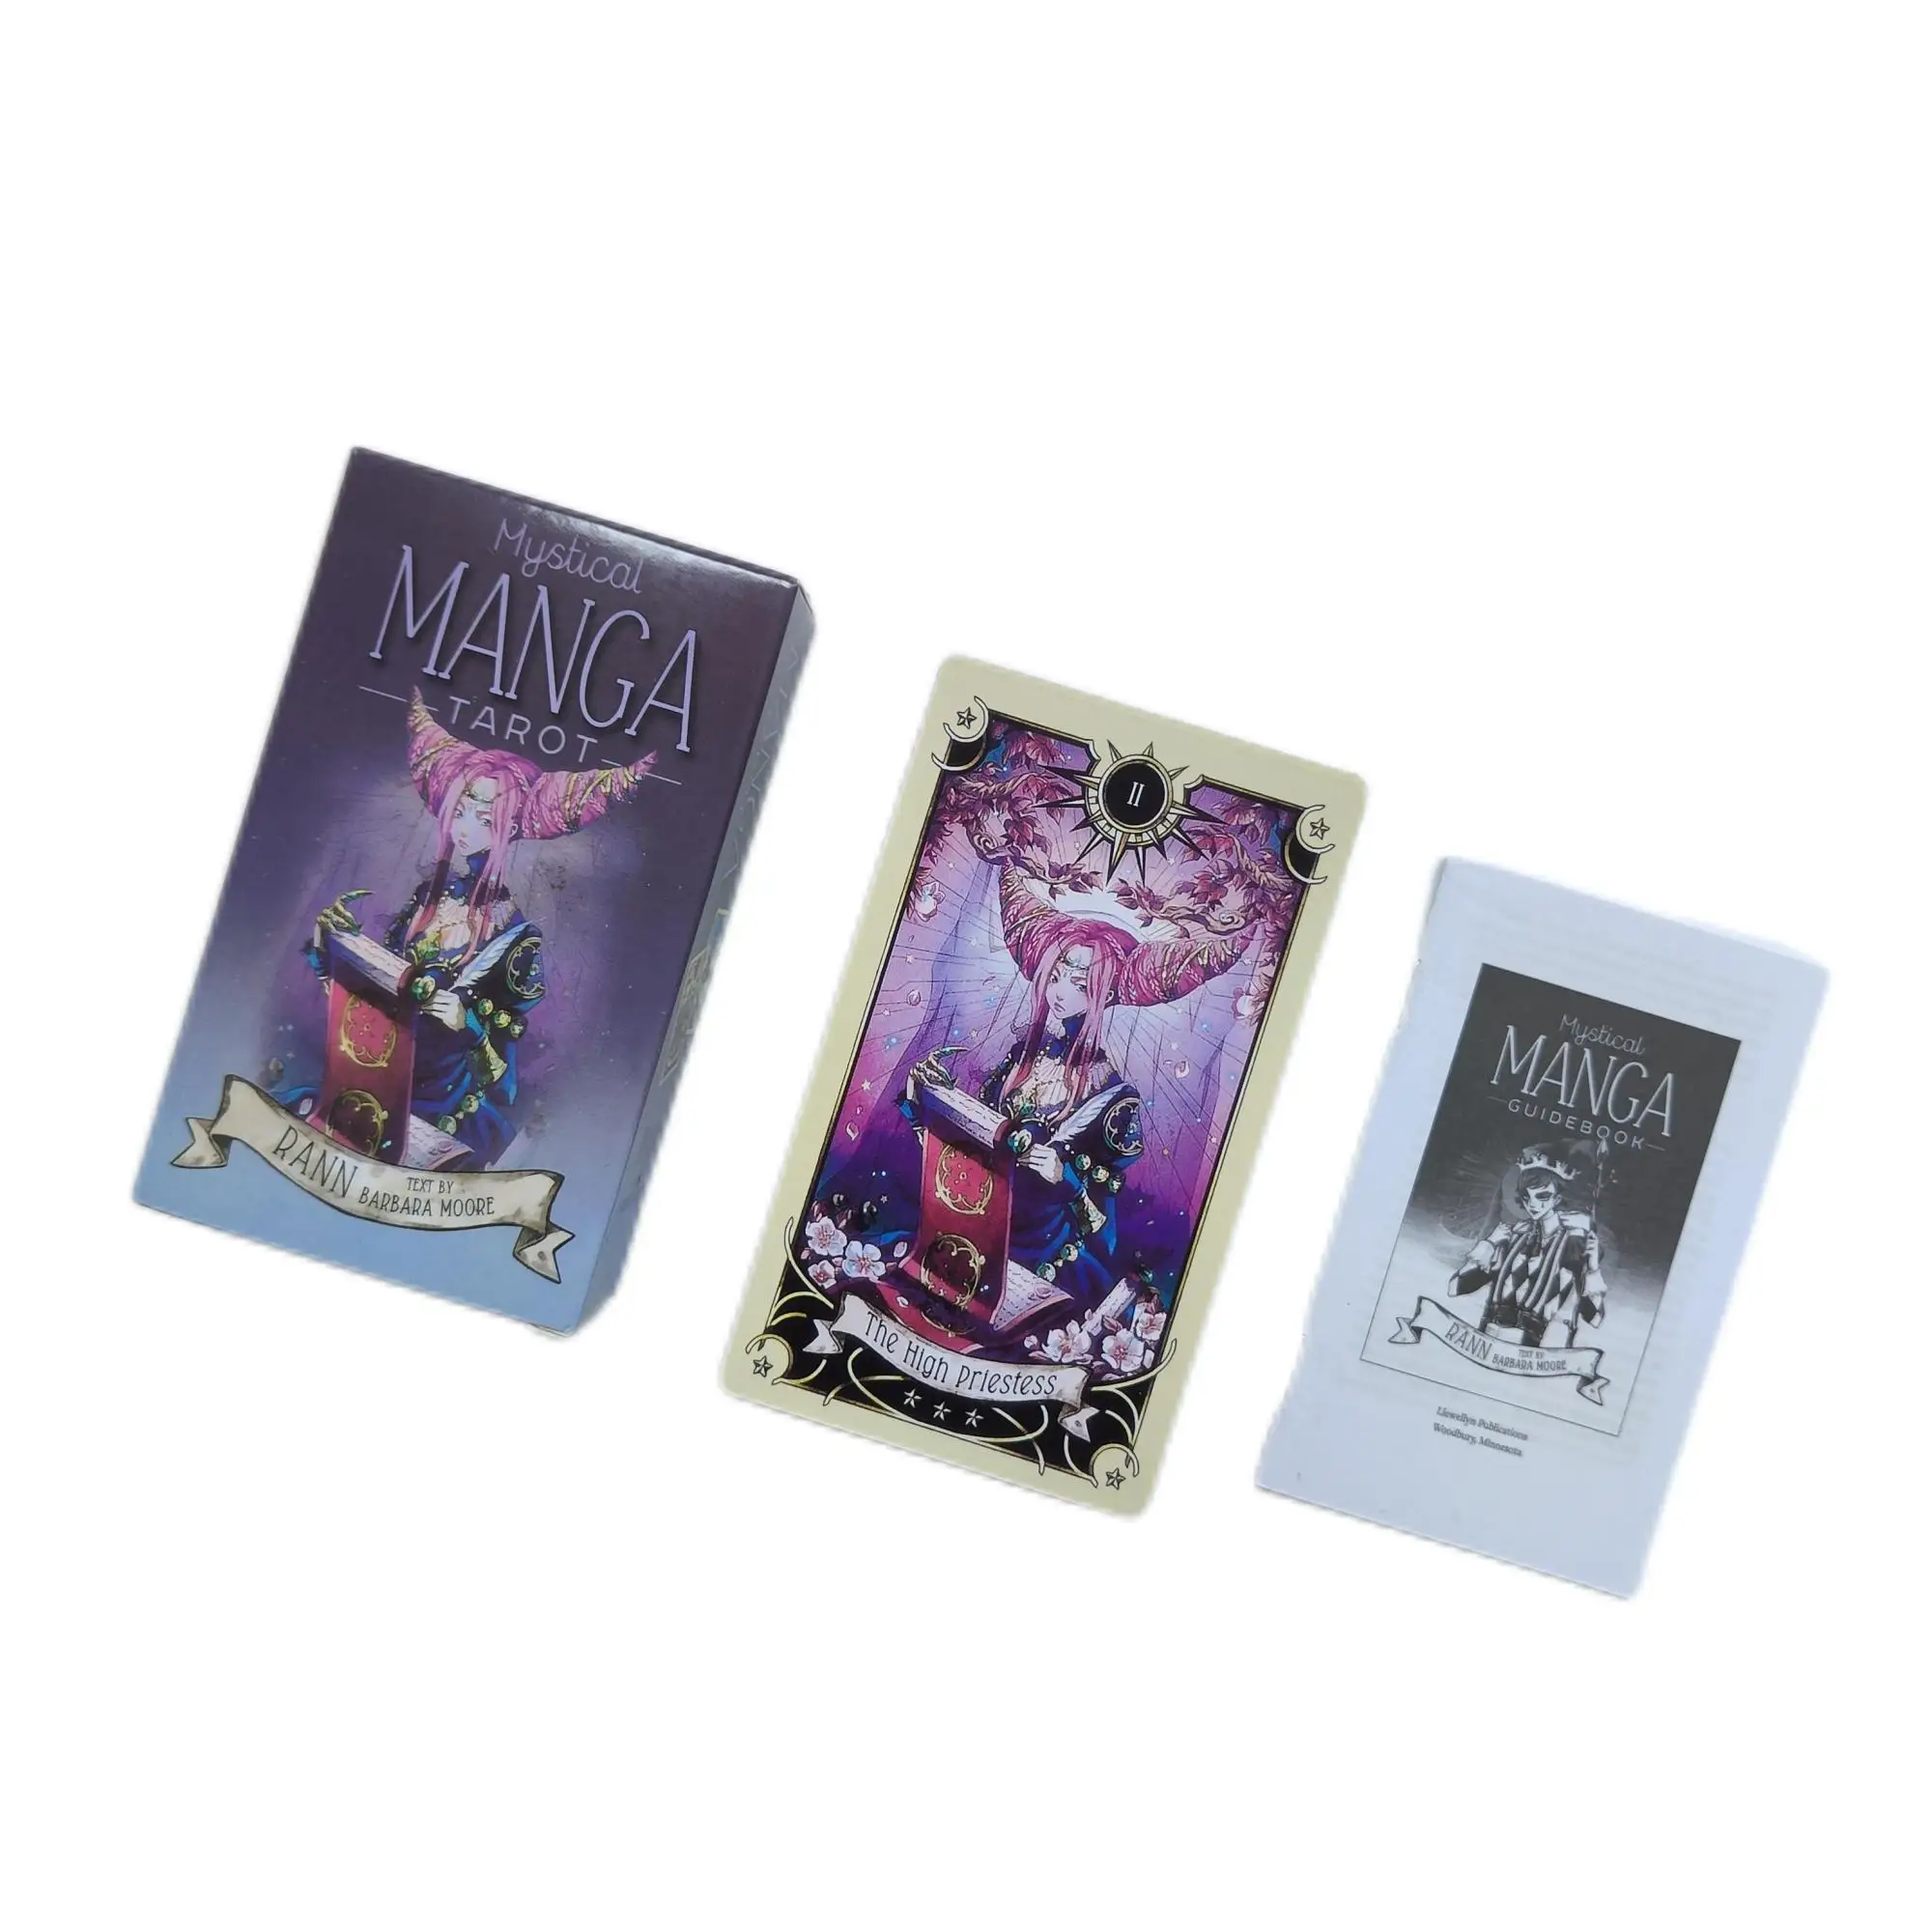 12x7cm Mystical Manga Tarot 78 Cards/Set With Guidebook Beautiful Design Style For Family Friends Holiday Gift Party Board Games enlarge